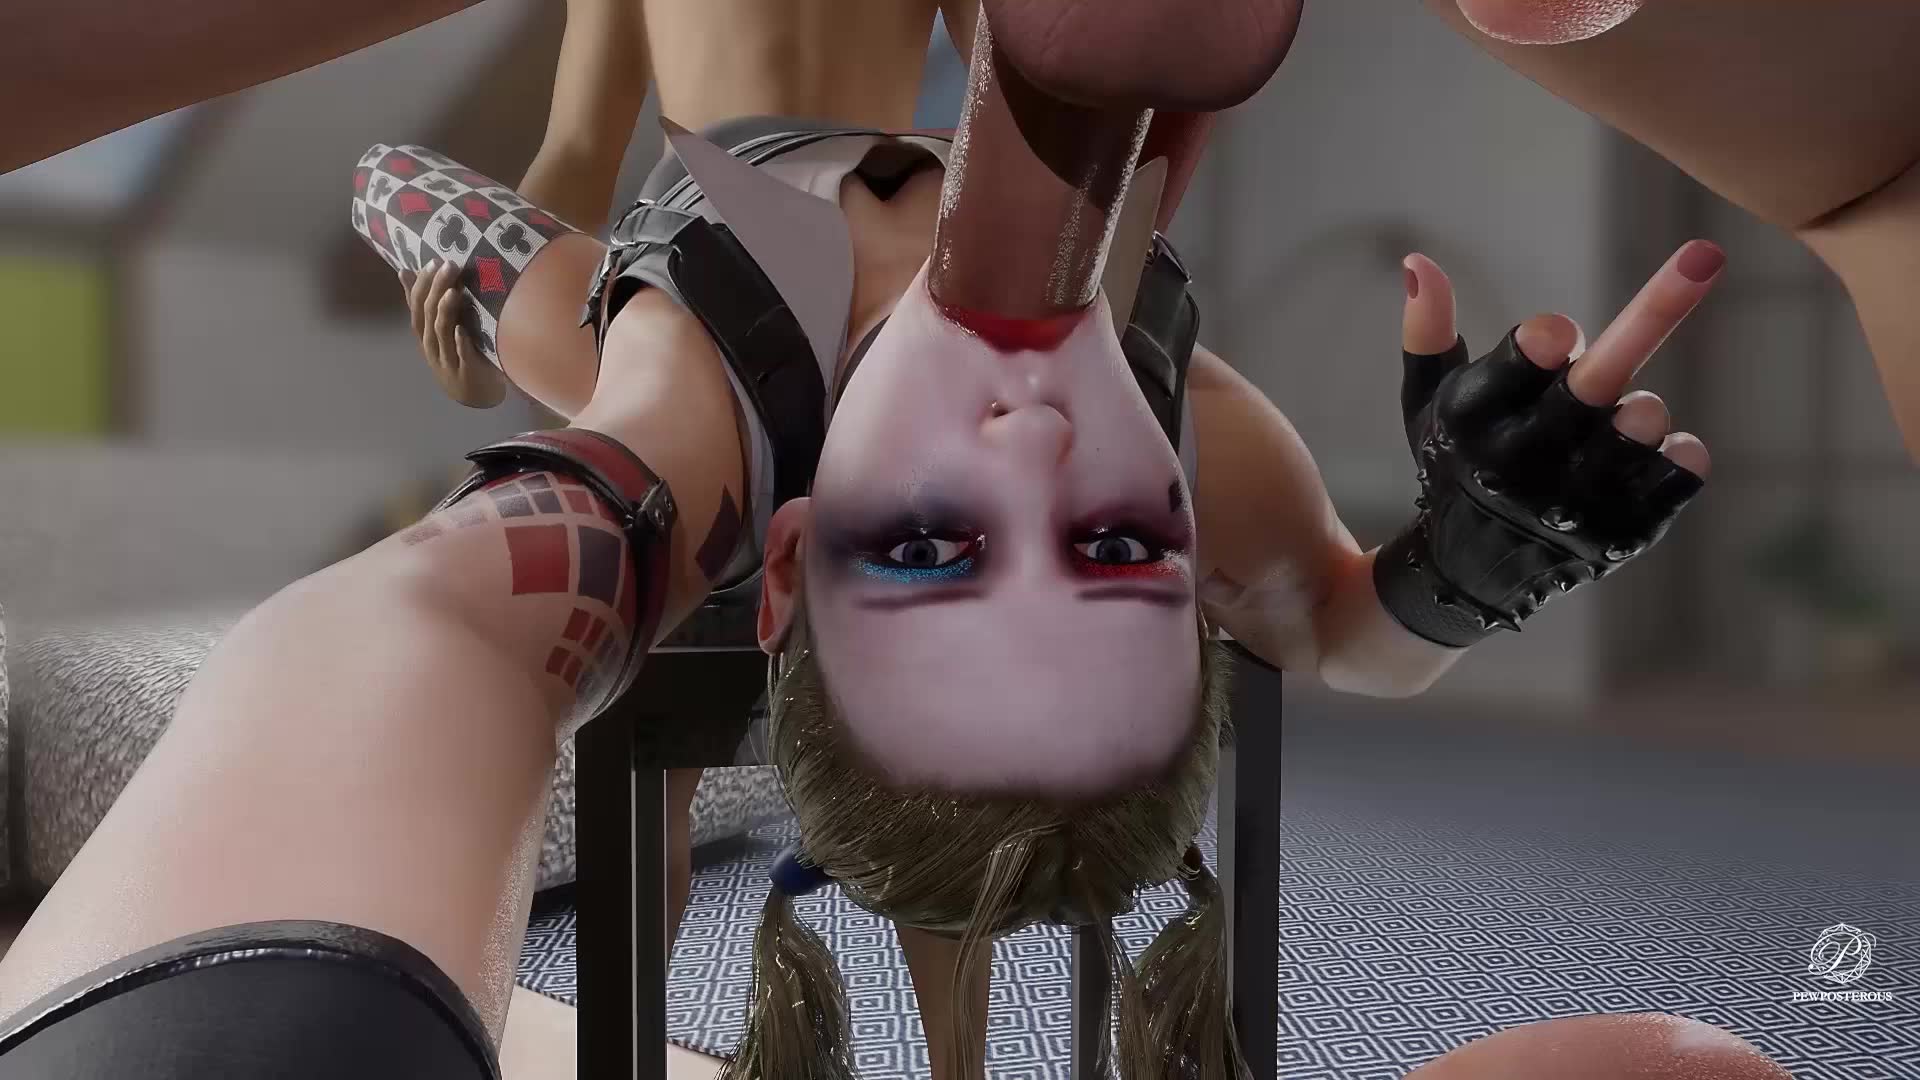 Cassie Cage Gives Deepthroat Blowjob And Gets Fucked – Mortal Kombat NSFW animation thumbnail